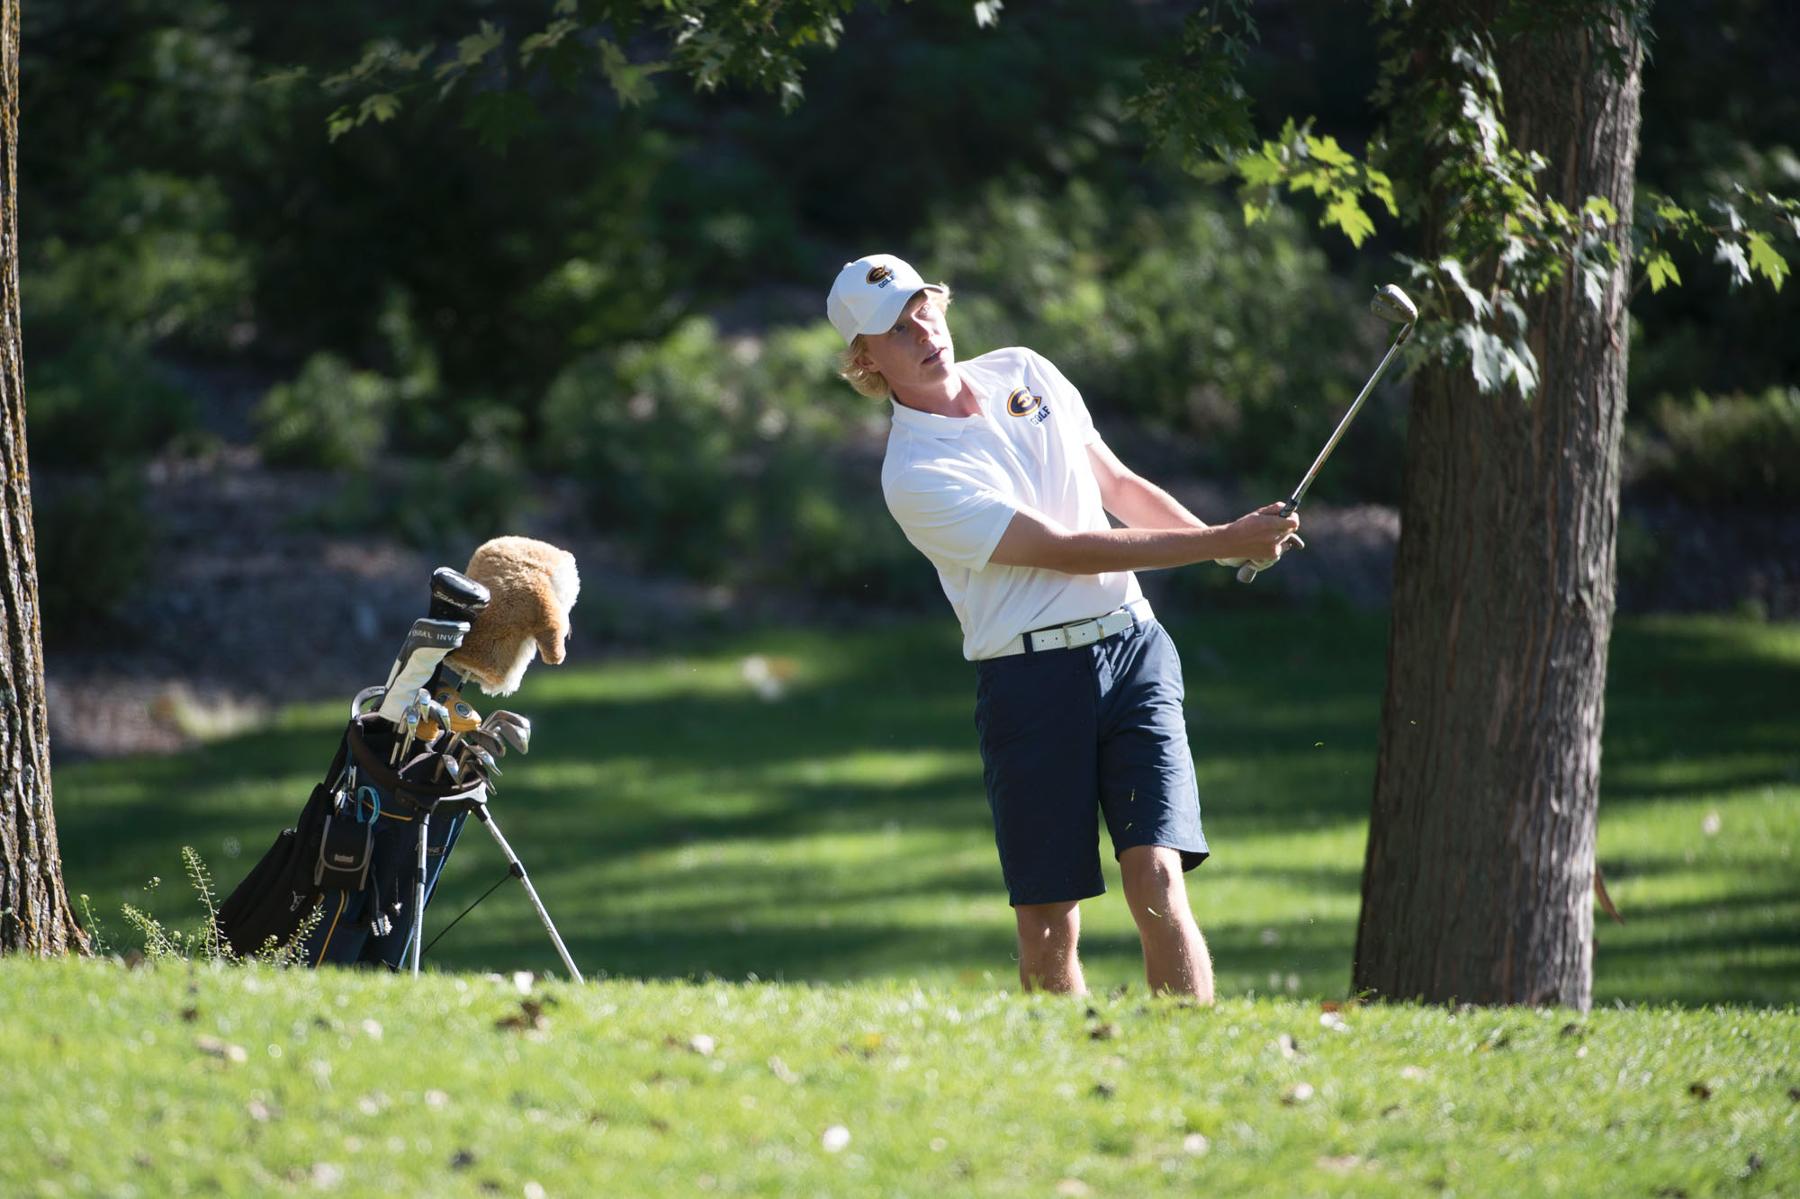 Men's Golf tied for 2nd after round 1 of Wrigglesworth Invite